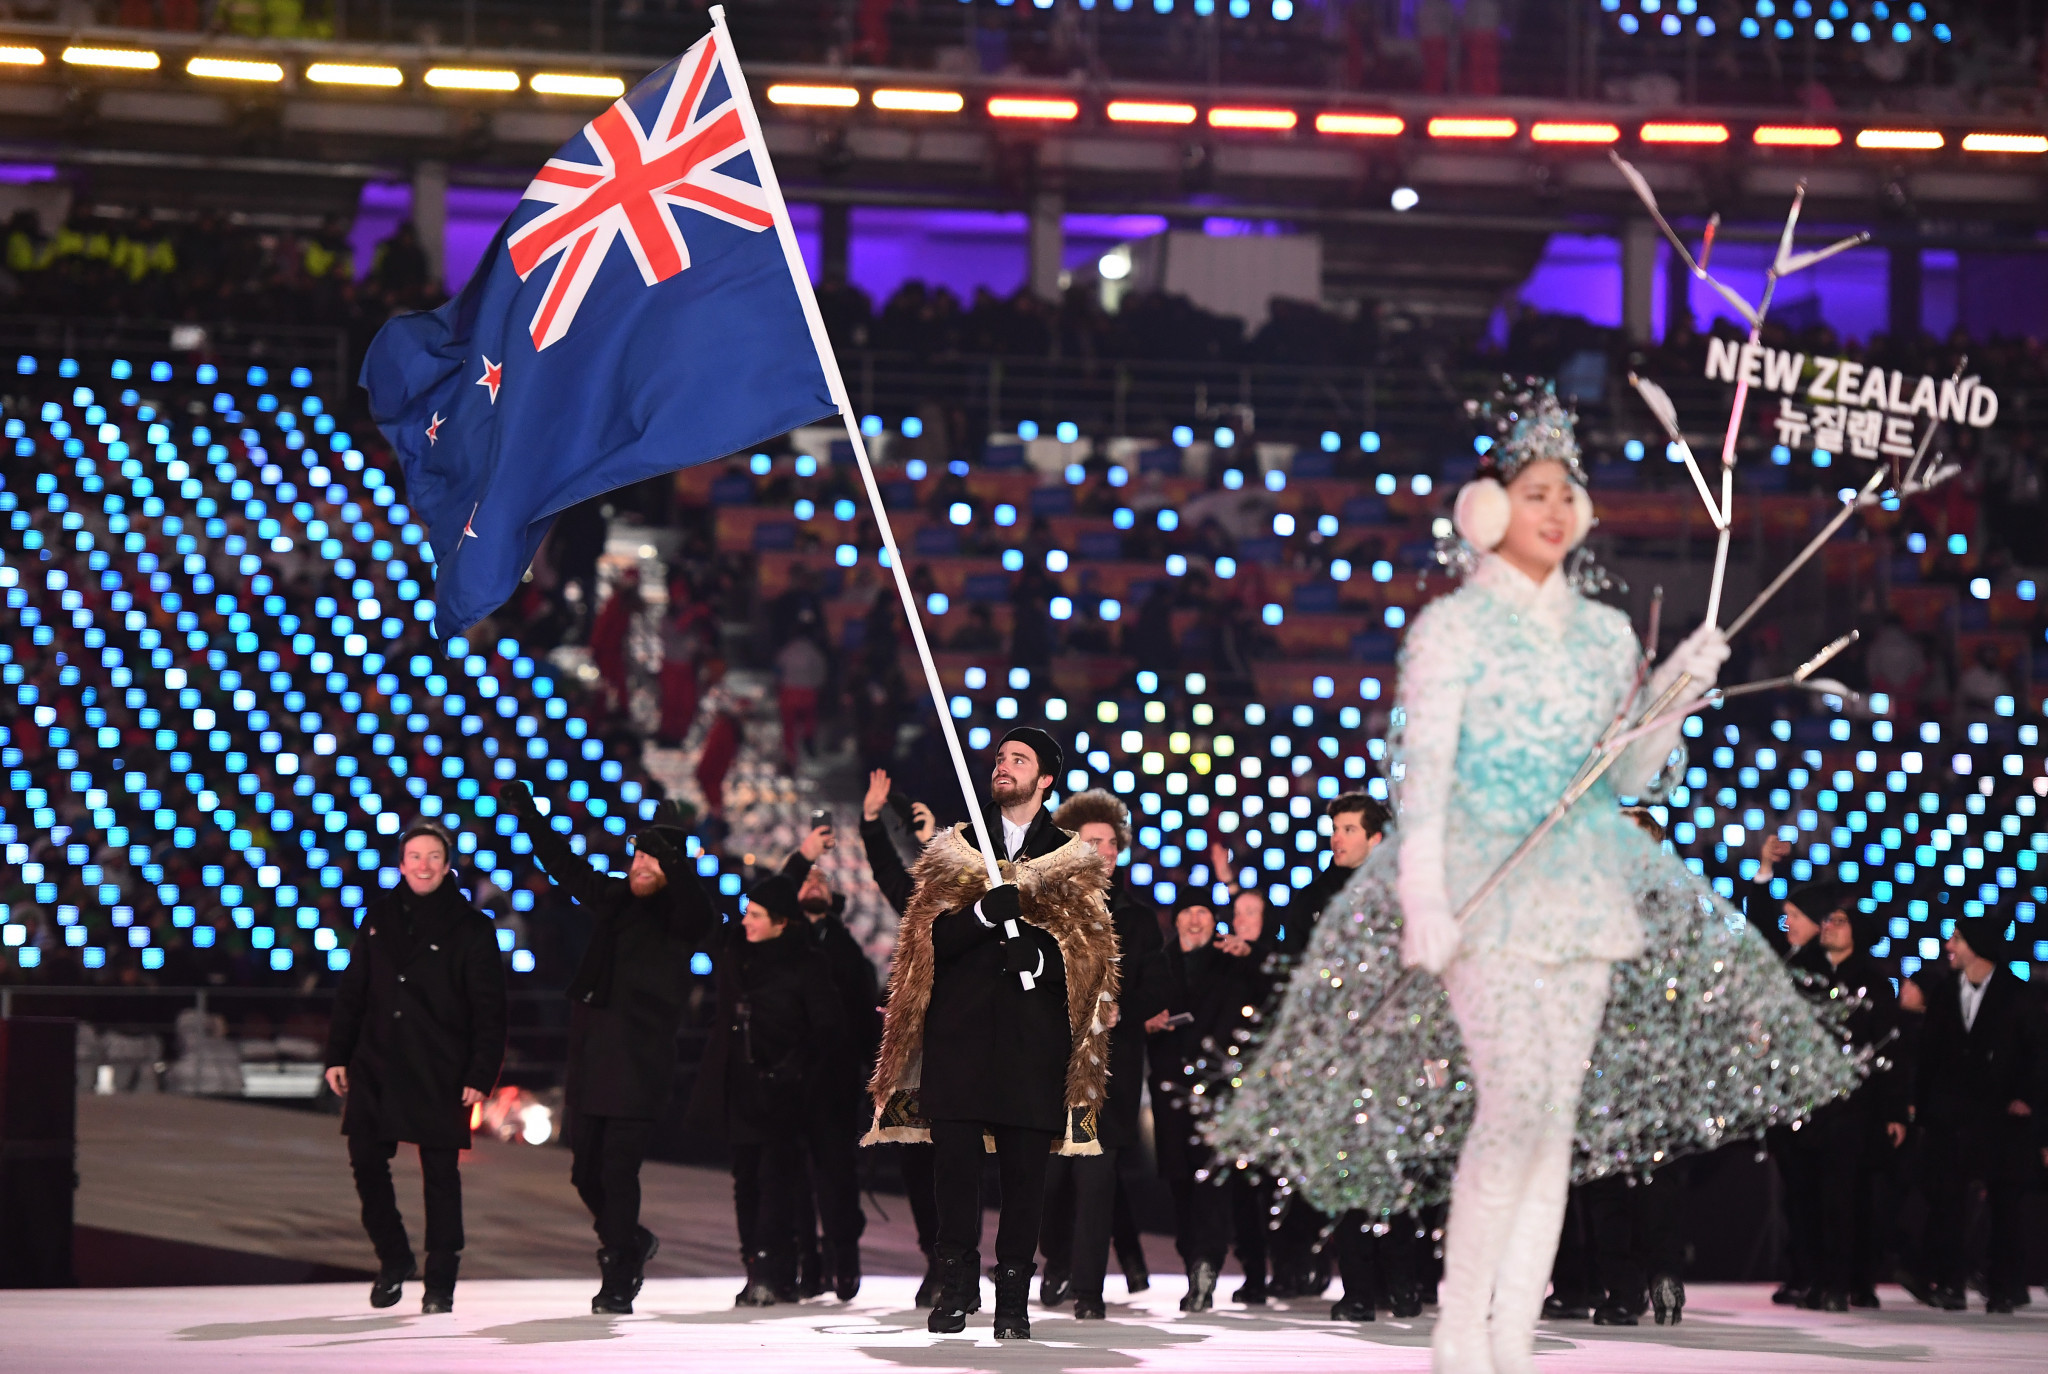 Freestyle skier Beau-James Wells carried New Zealand's flag at the Opening Ceremony of Pyeongchang 2018 ©Getty Images